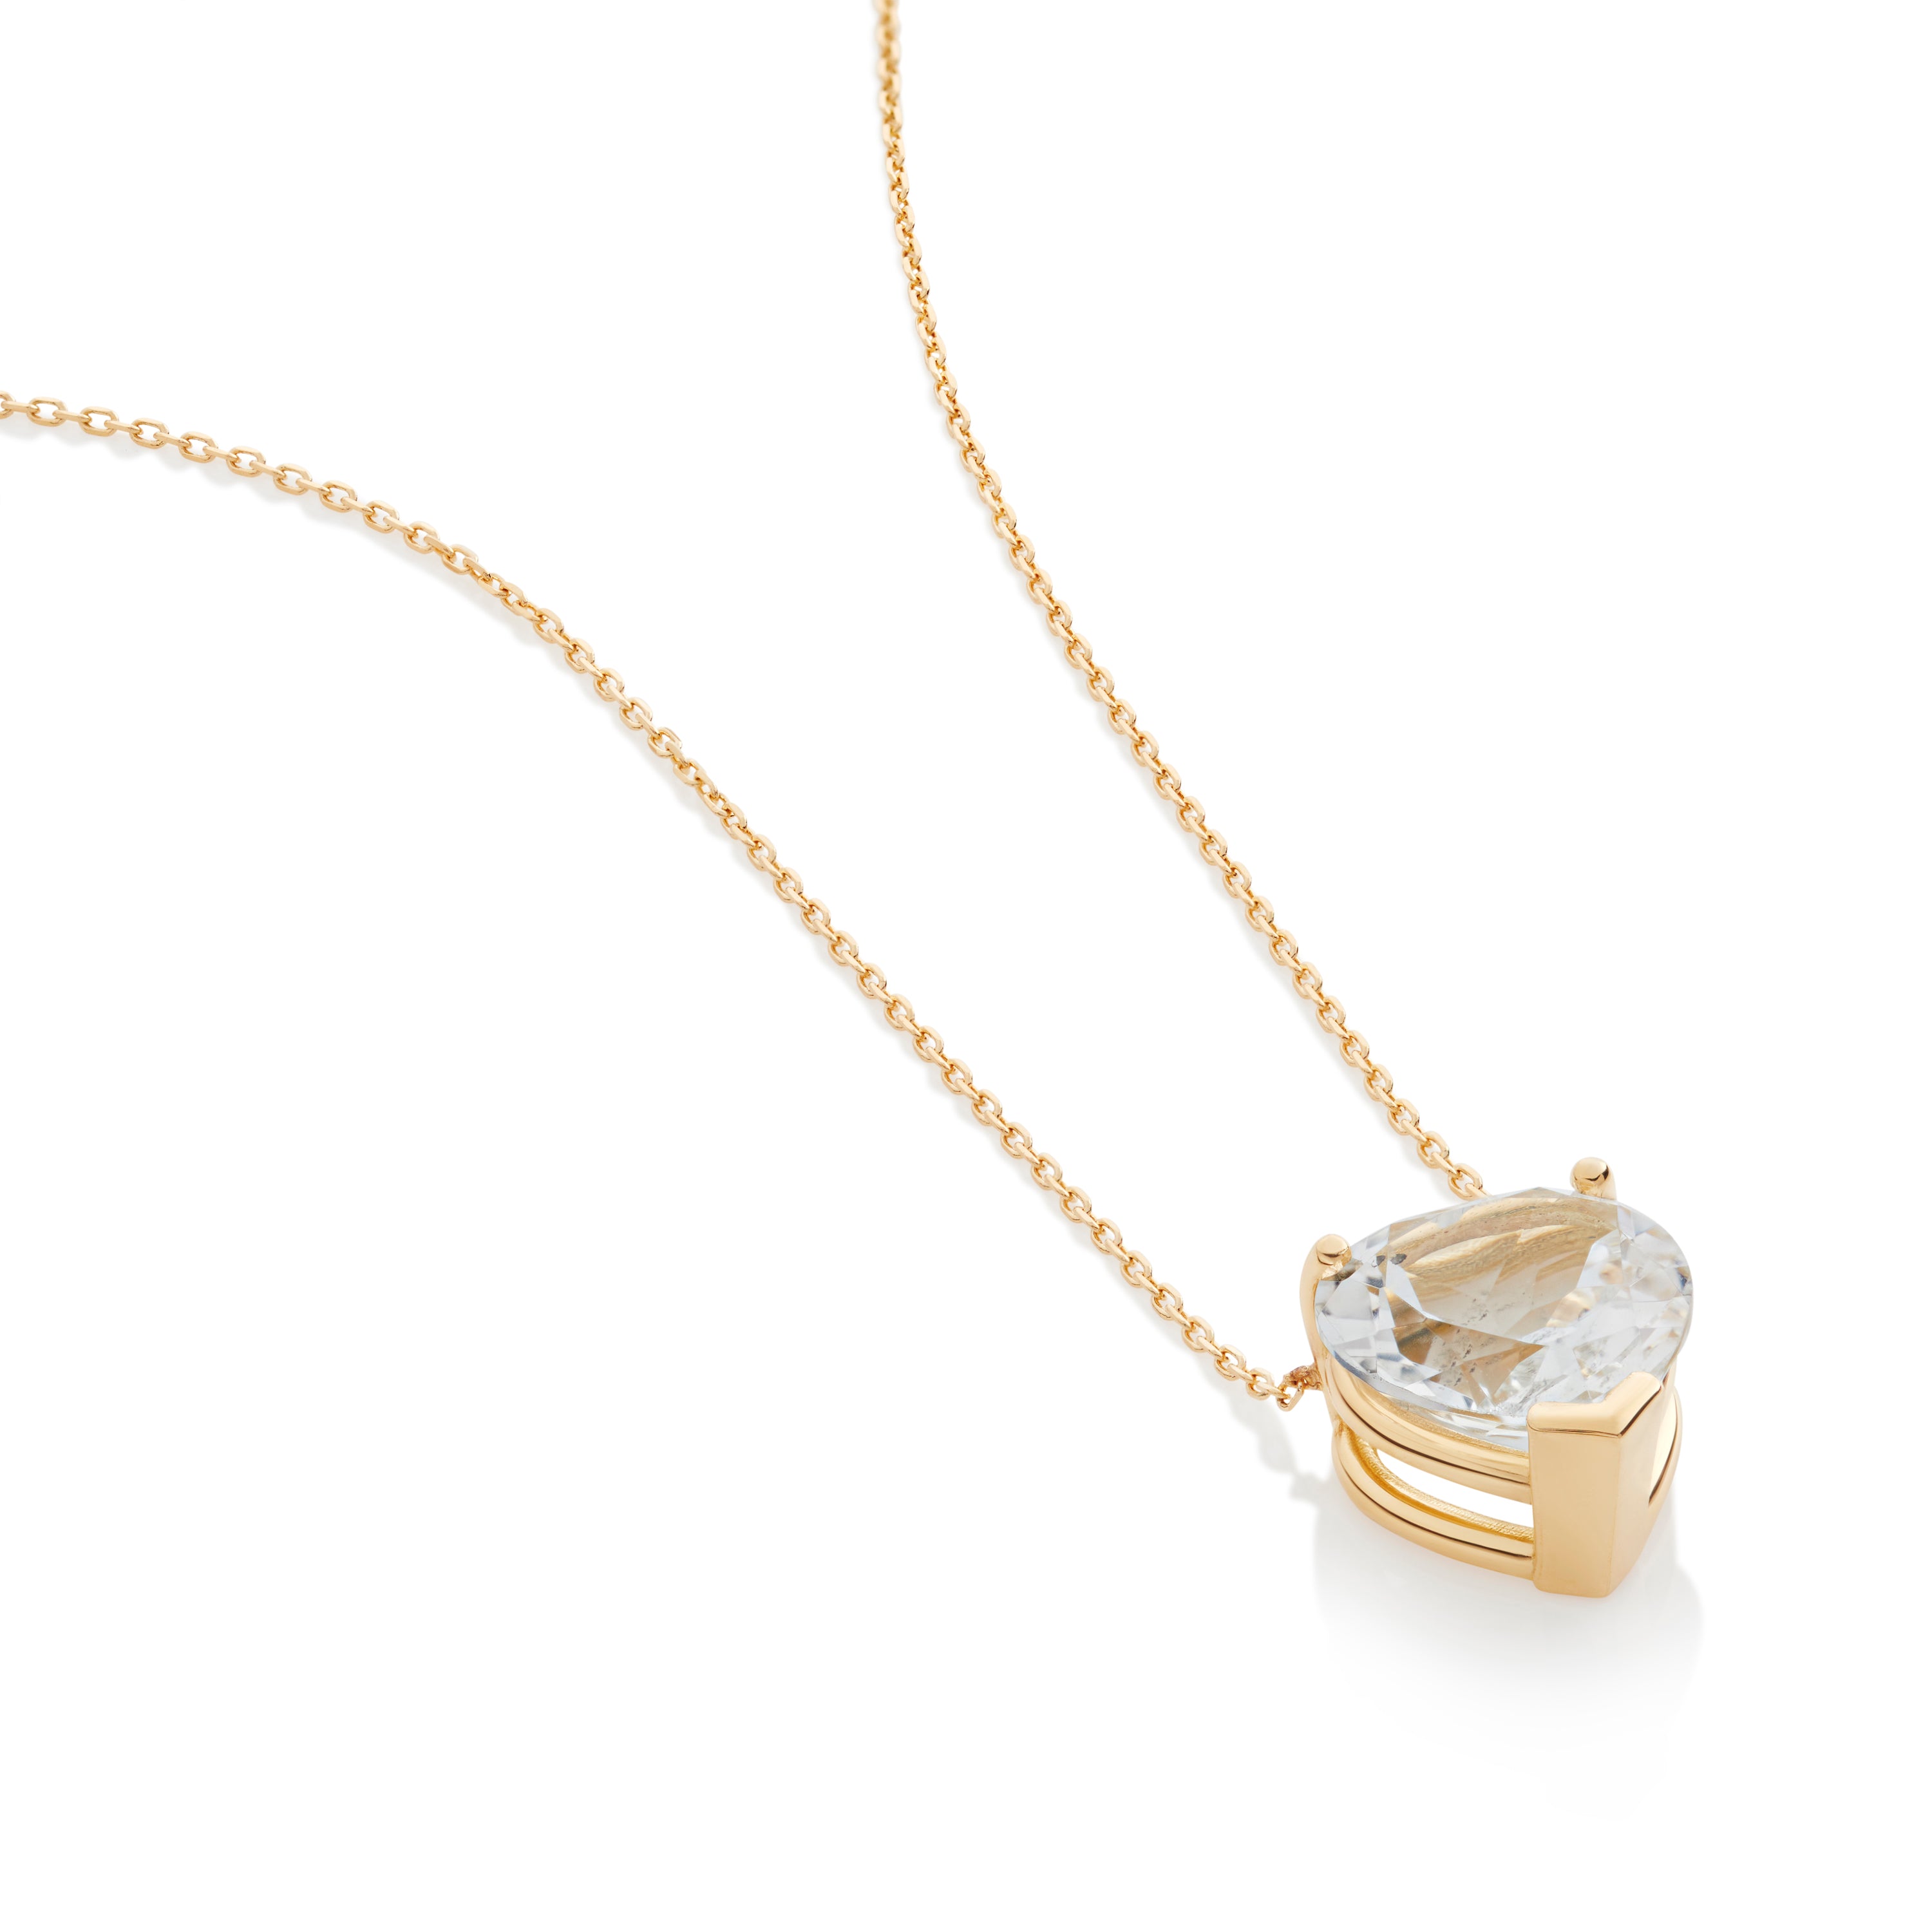 18K Solid Gold Hear Shaped Topaz Necklace - Ines Santos Jewellery